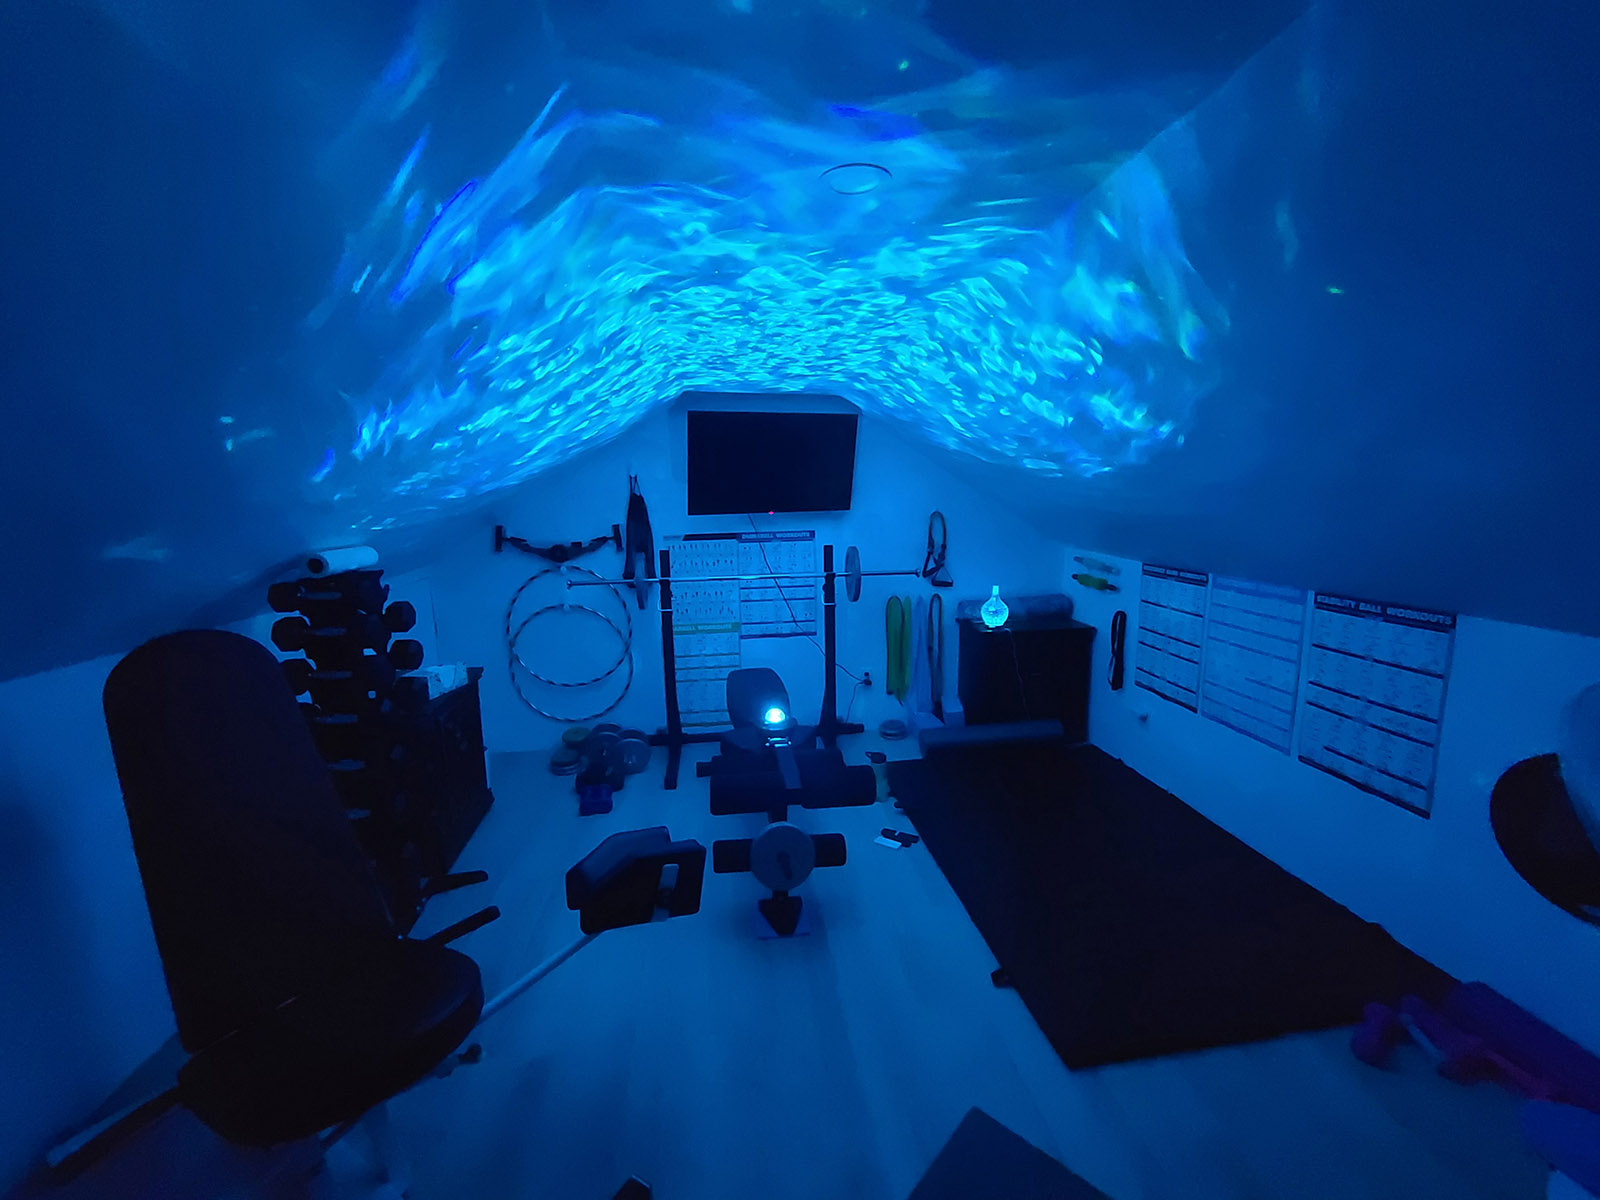 A home gym illuminated in blue, with a galaxy light projection on the ceiling.